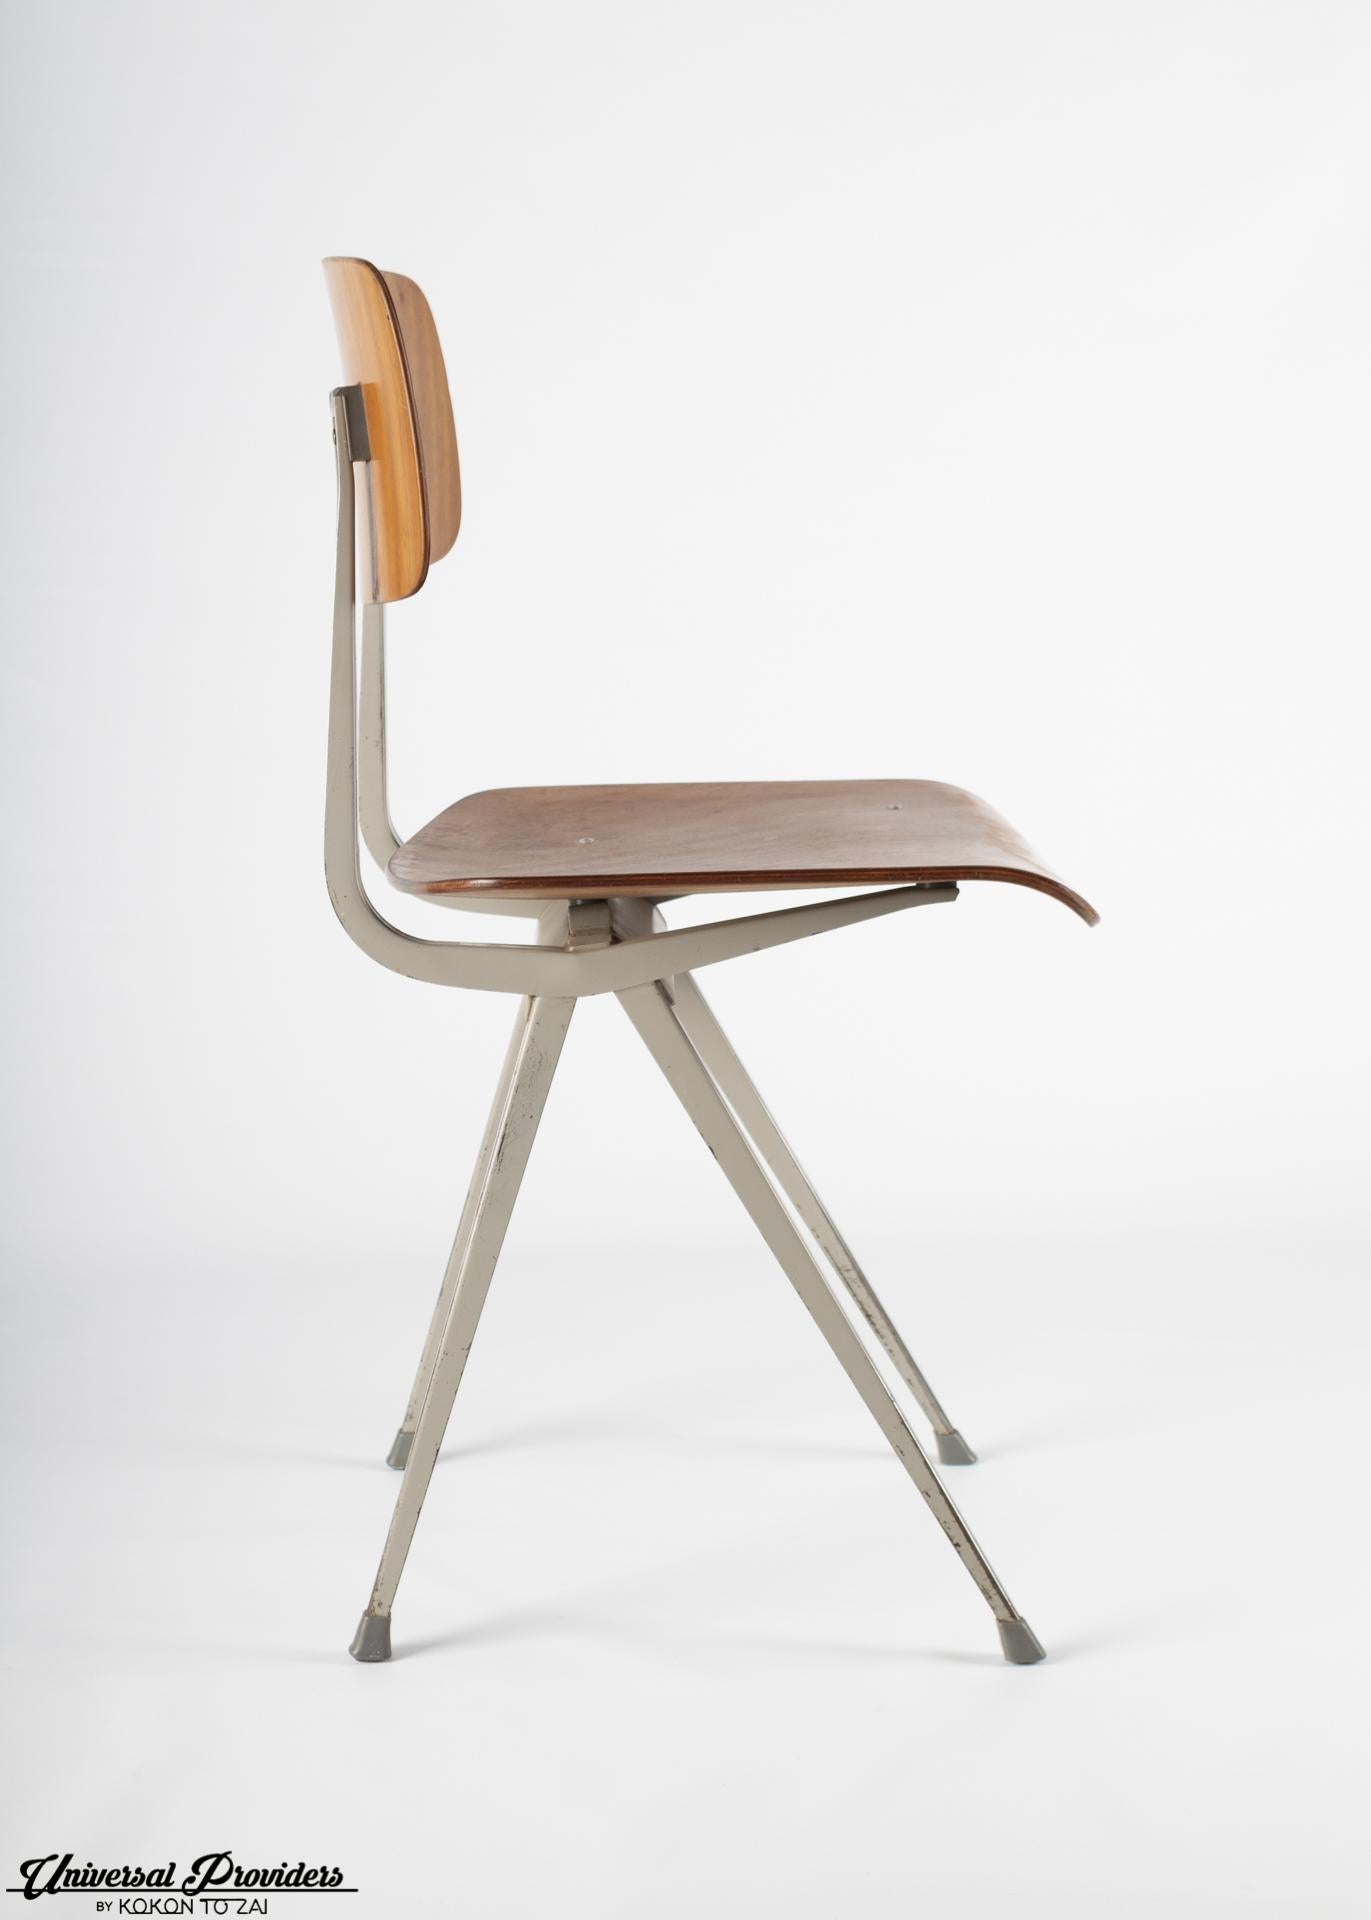 French Result Chair by Wim Rietveld and Friso Kramer, circa 1958